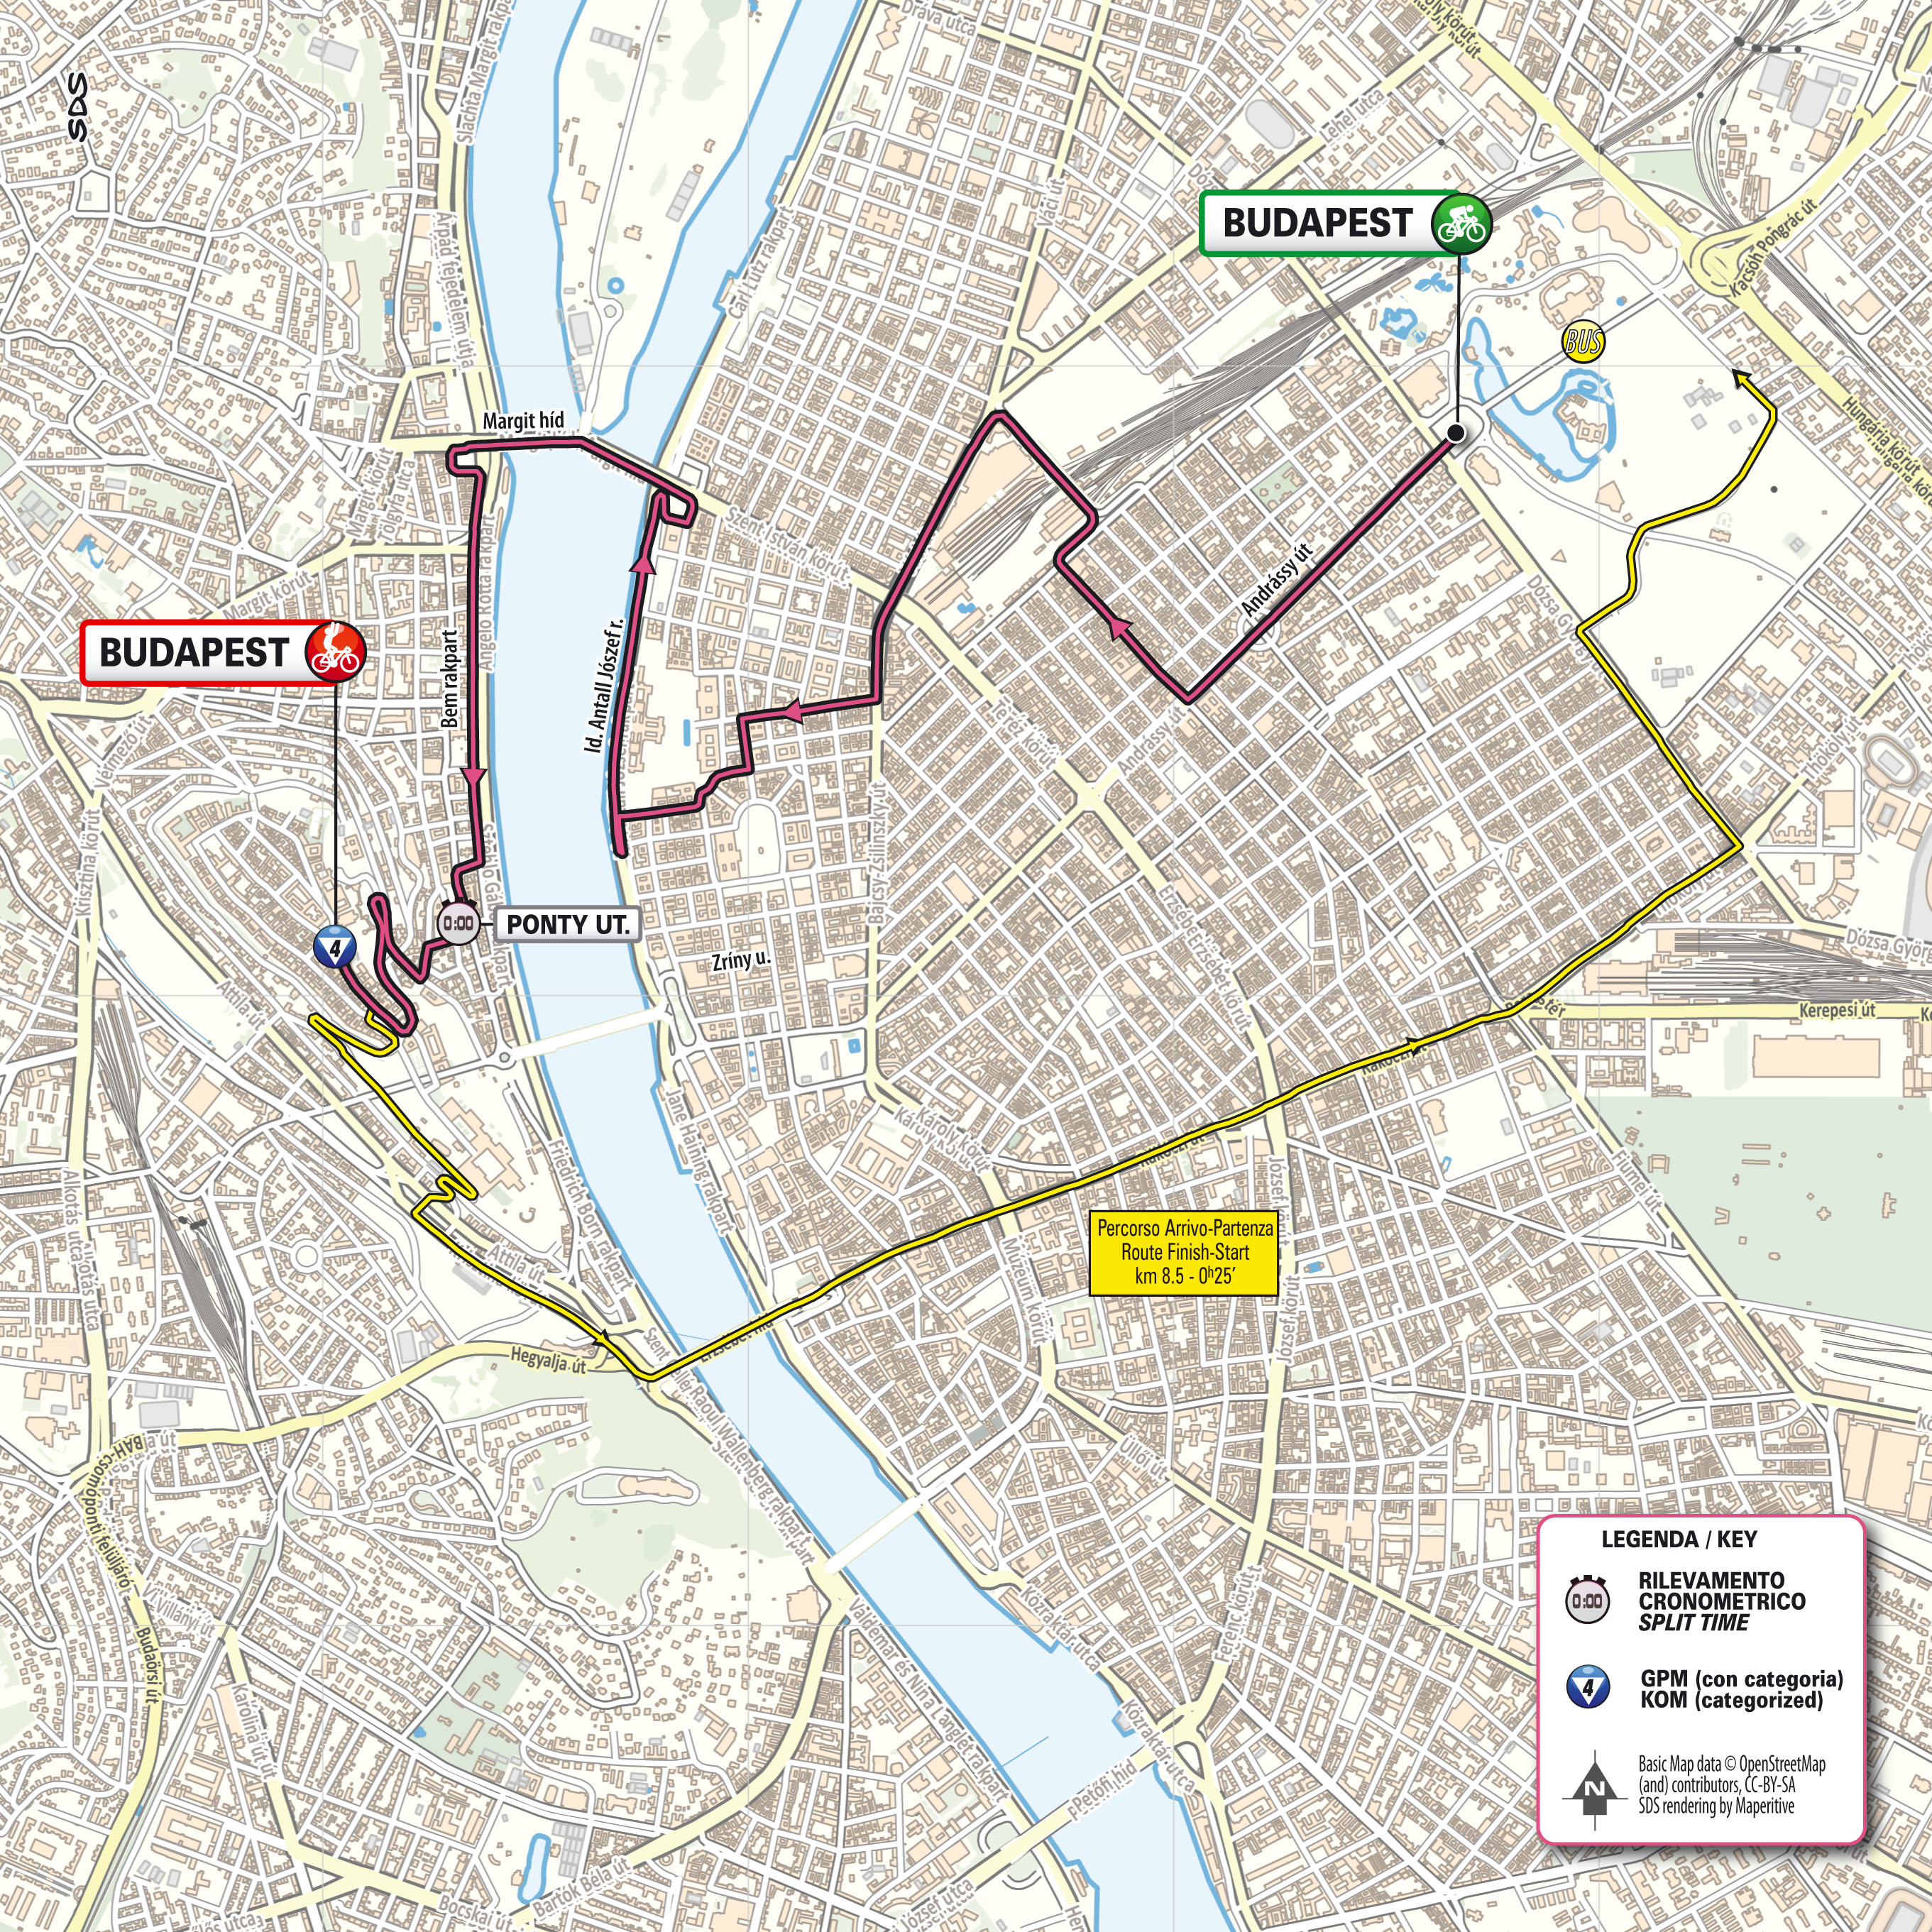 The route map of stage 2 of the 2022 Giro d'Italia